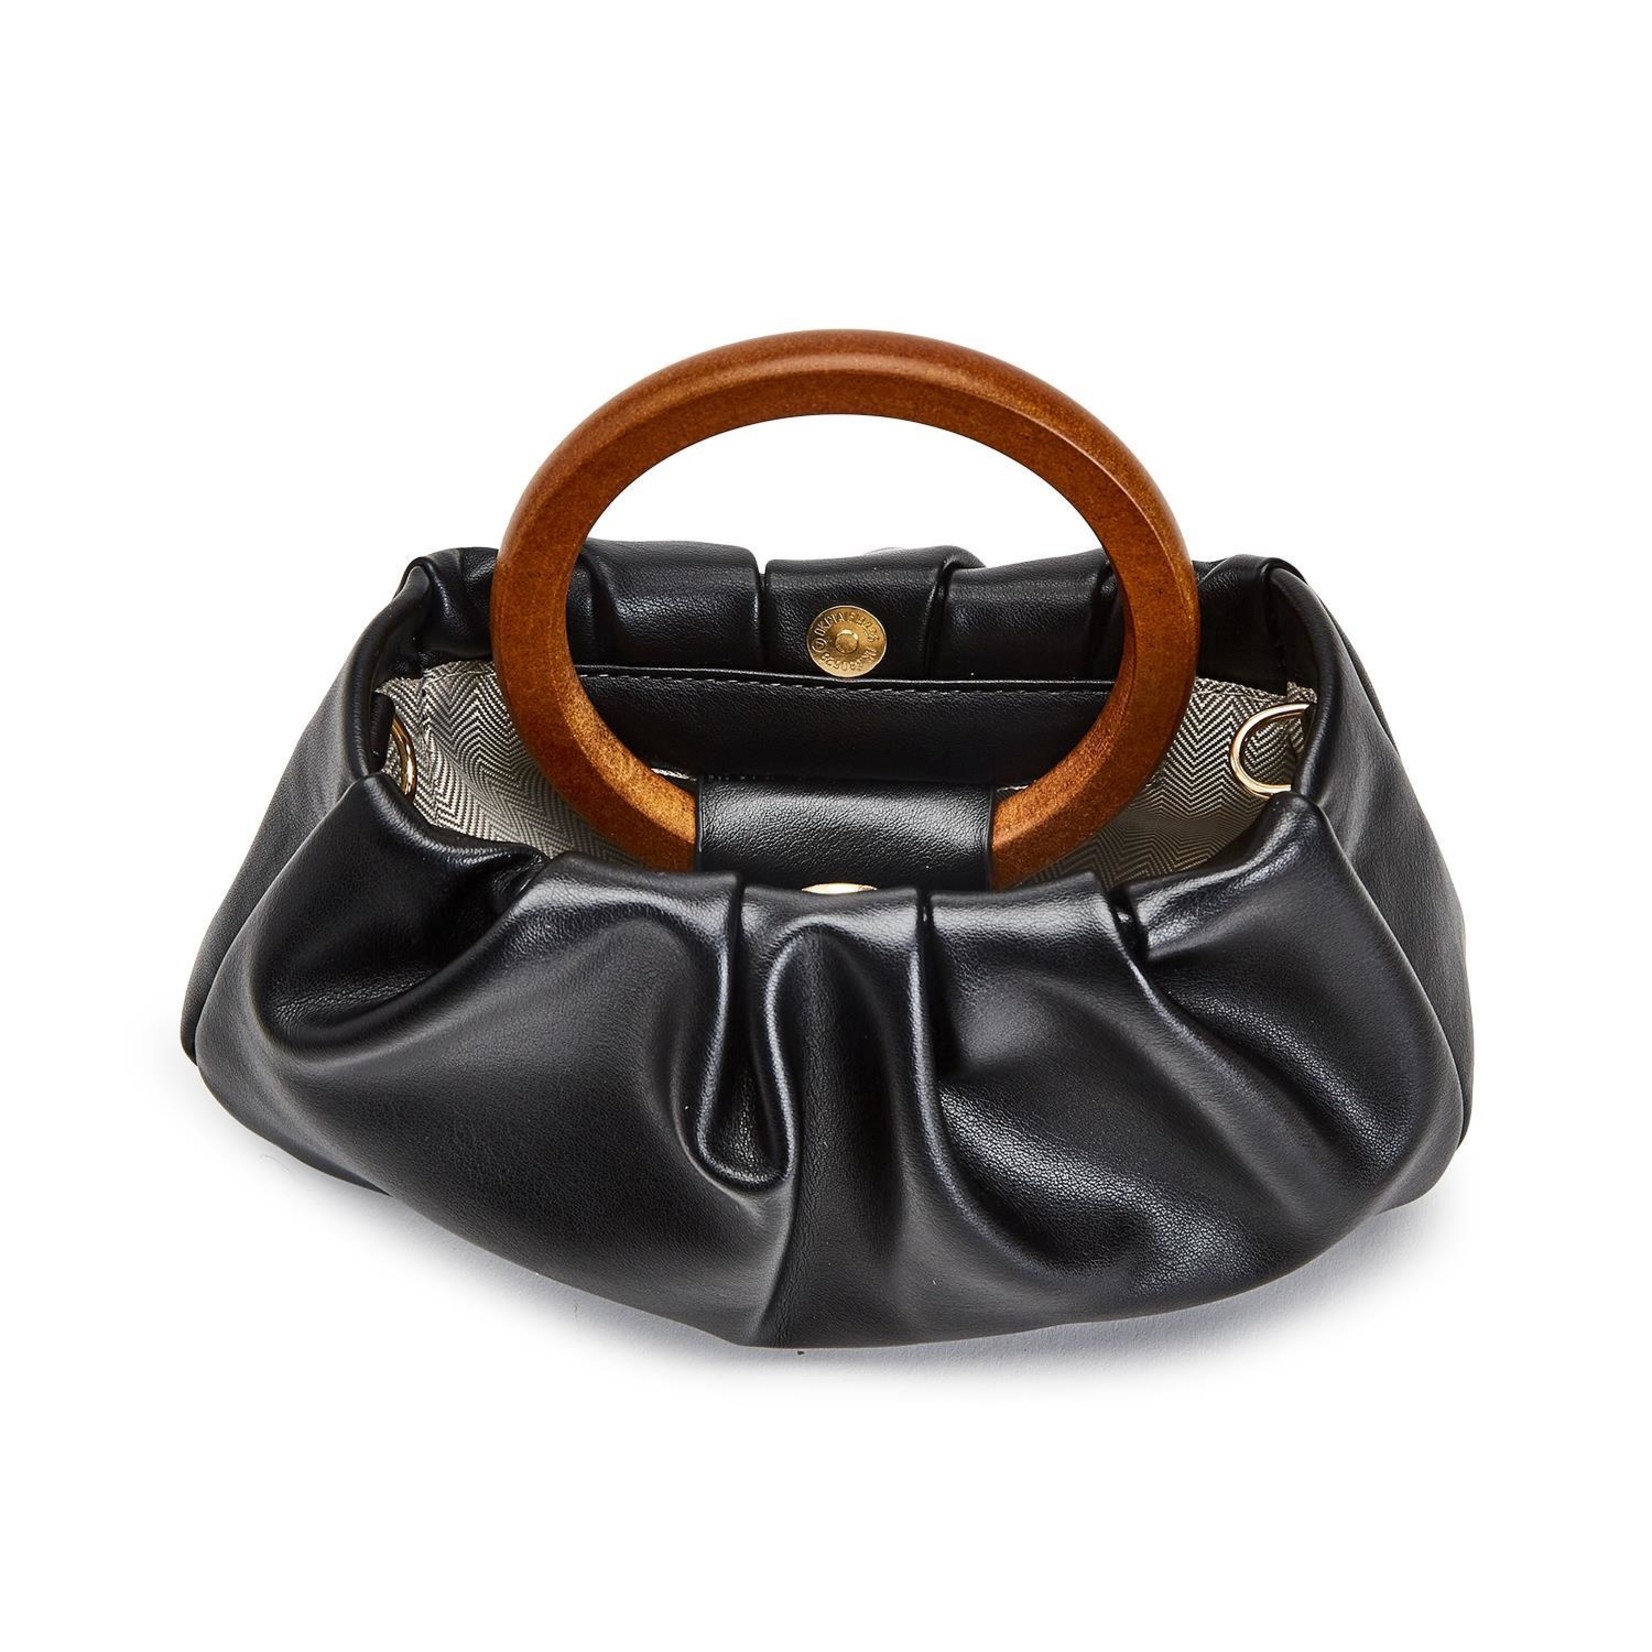 Two's Company Vegan Leather Bag with Circular Wooden Handles